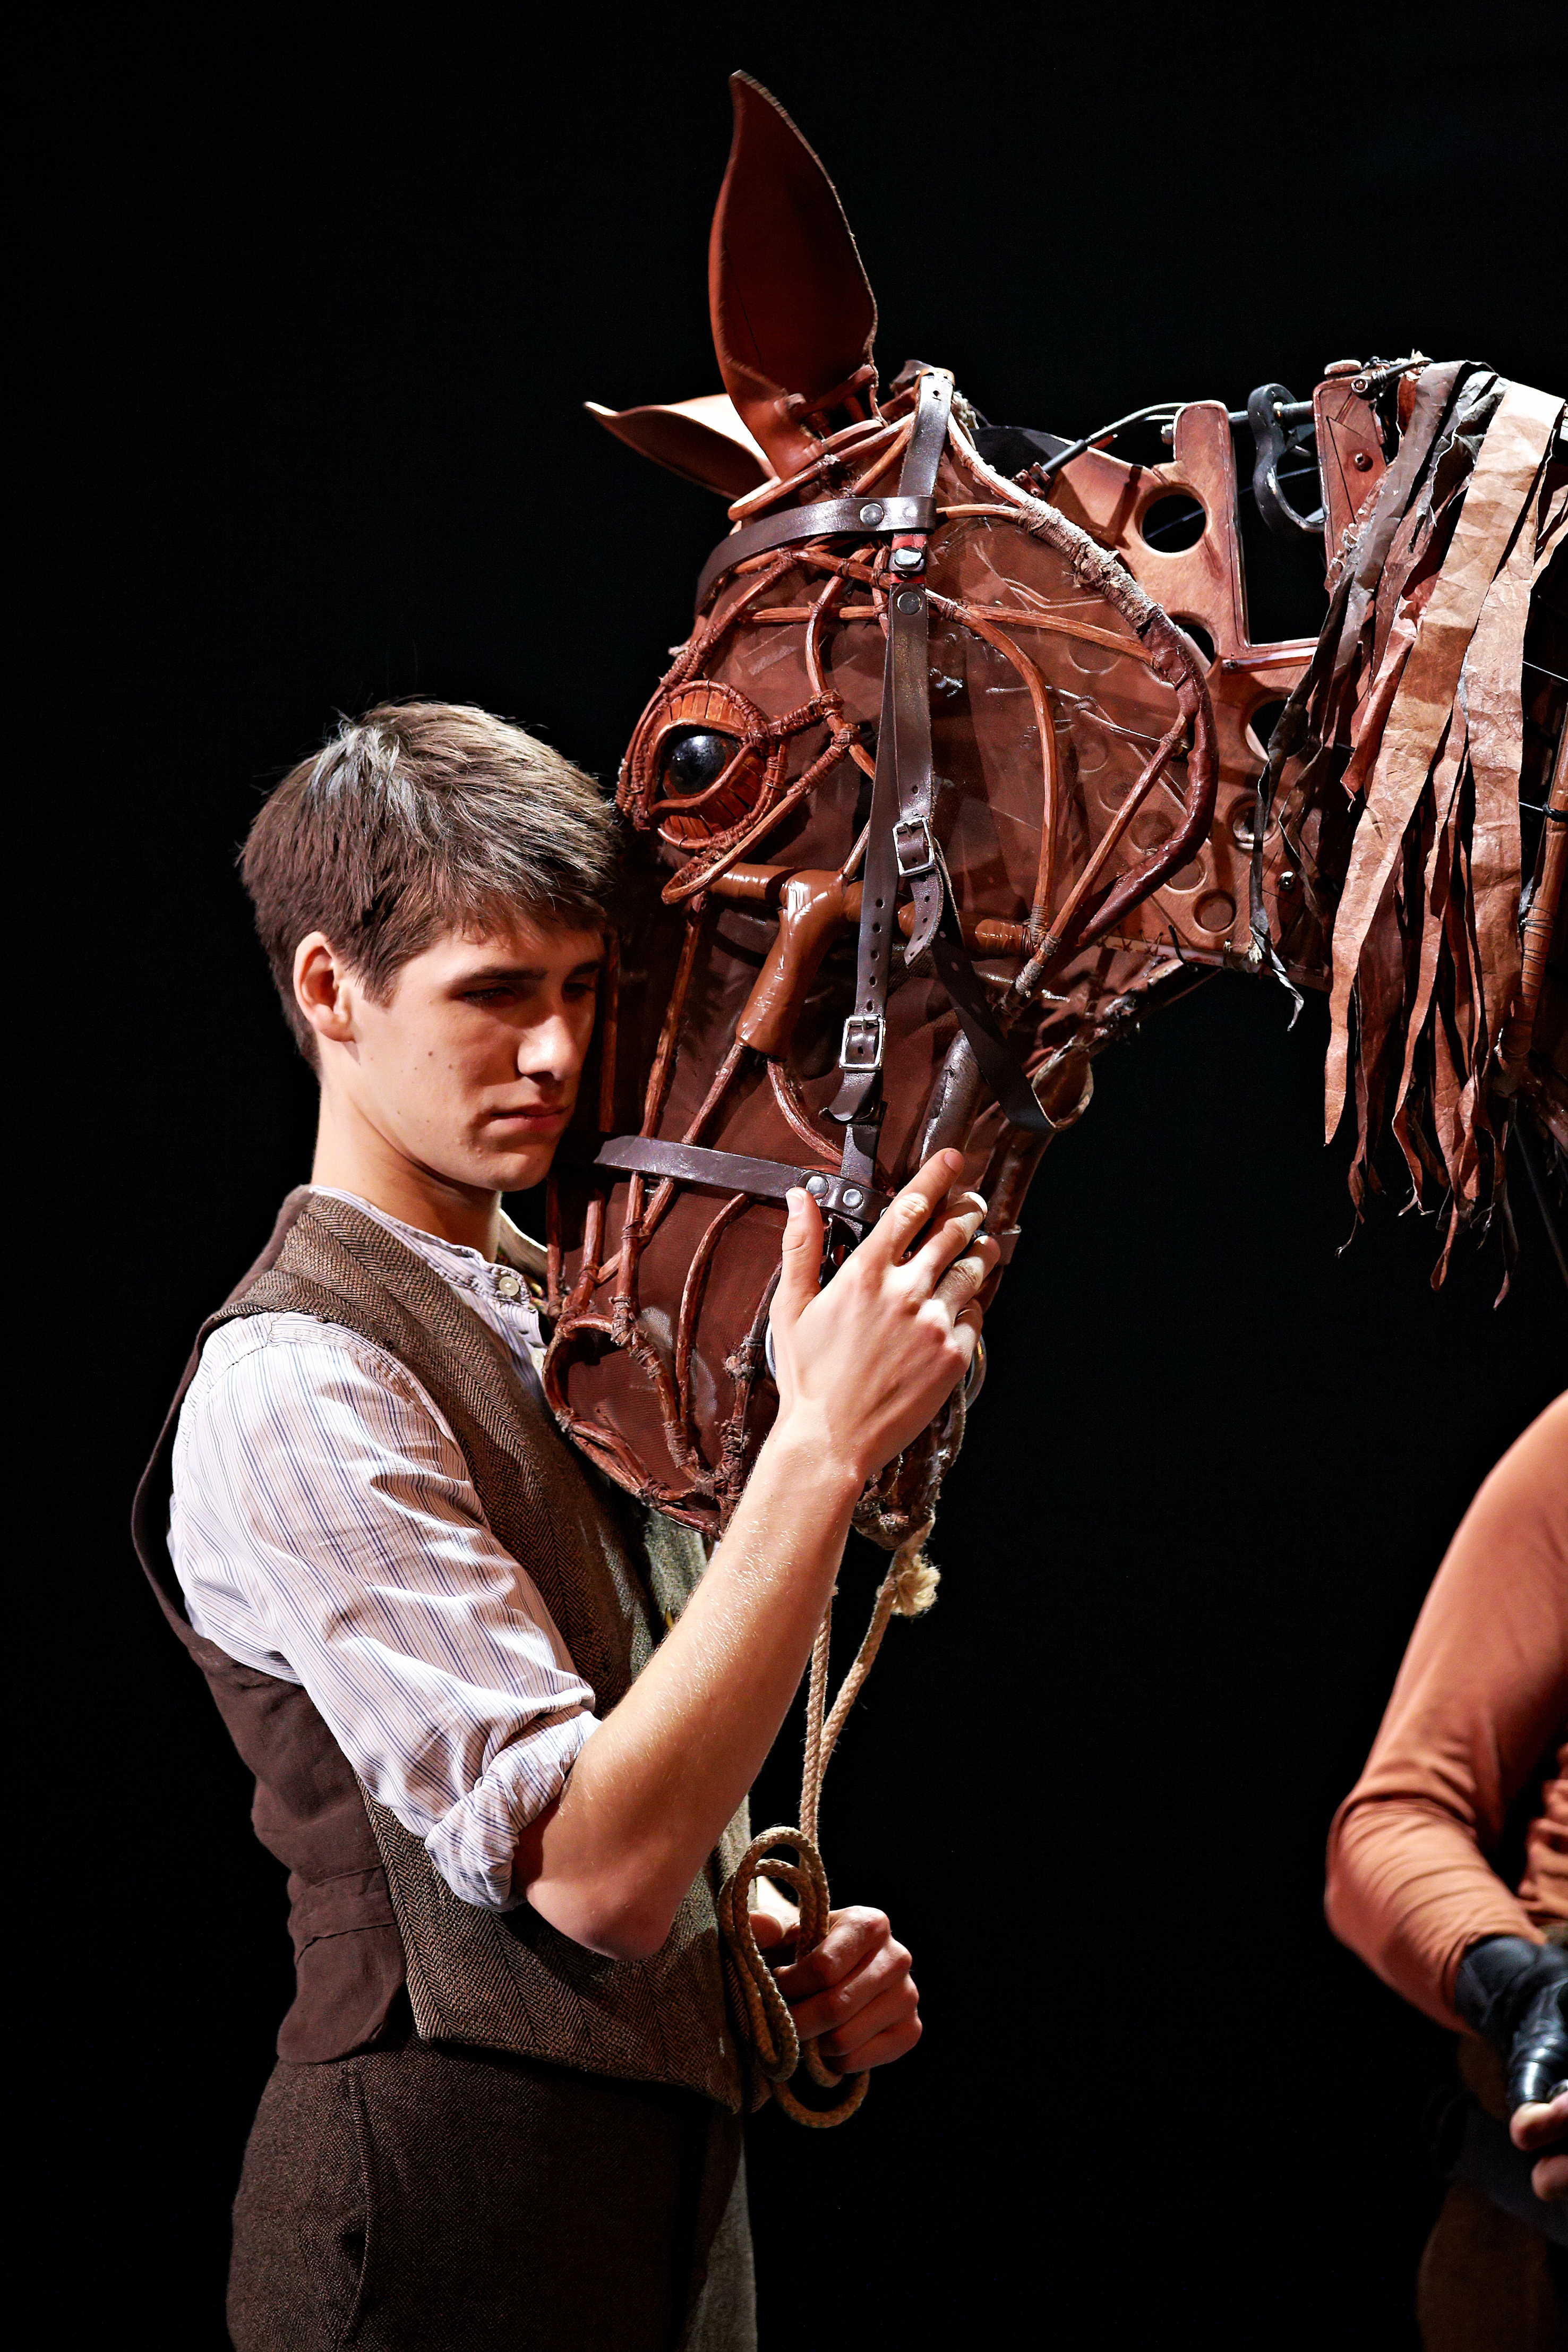 a chesnut horse affectionately touching its nose to the actors face.